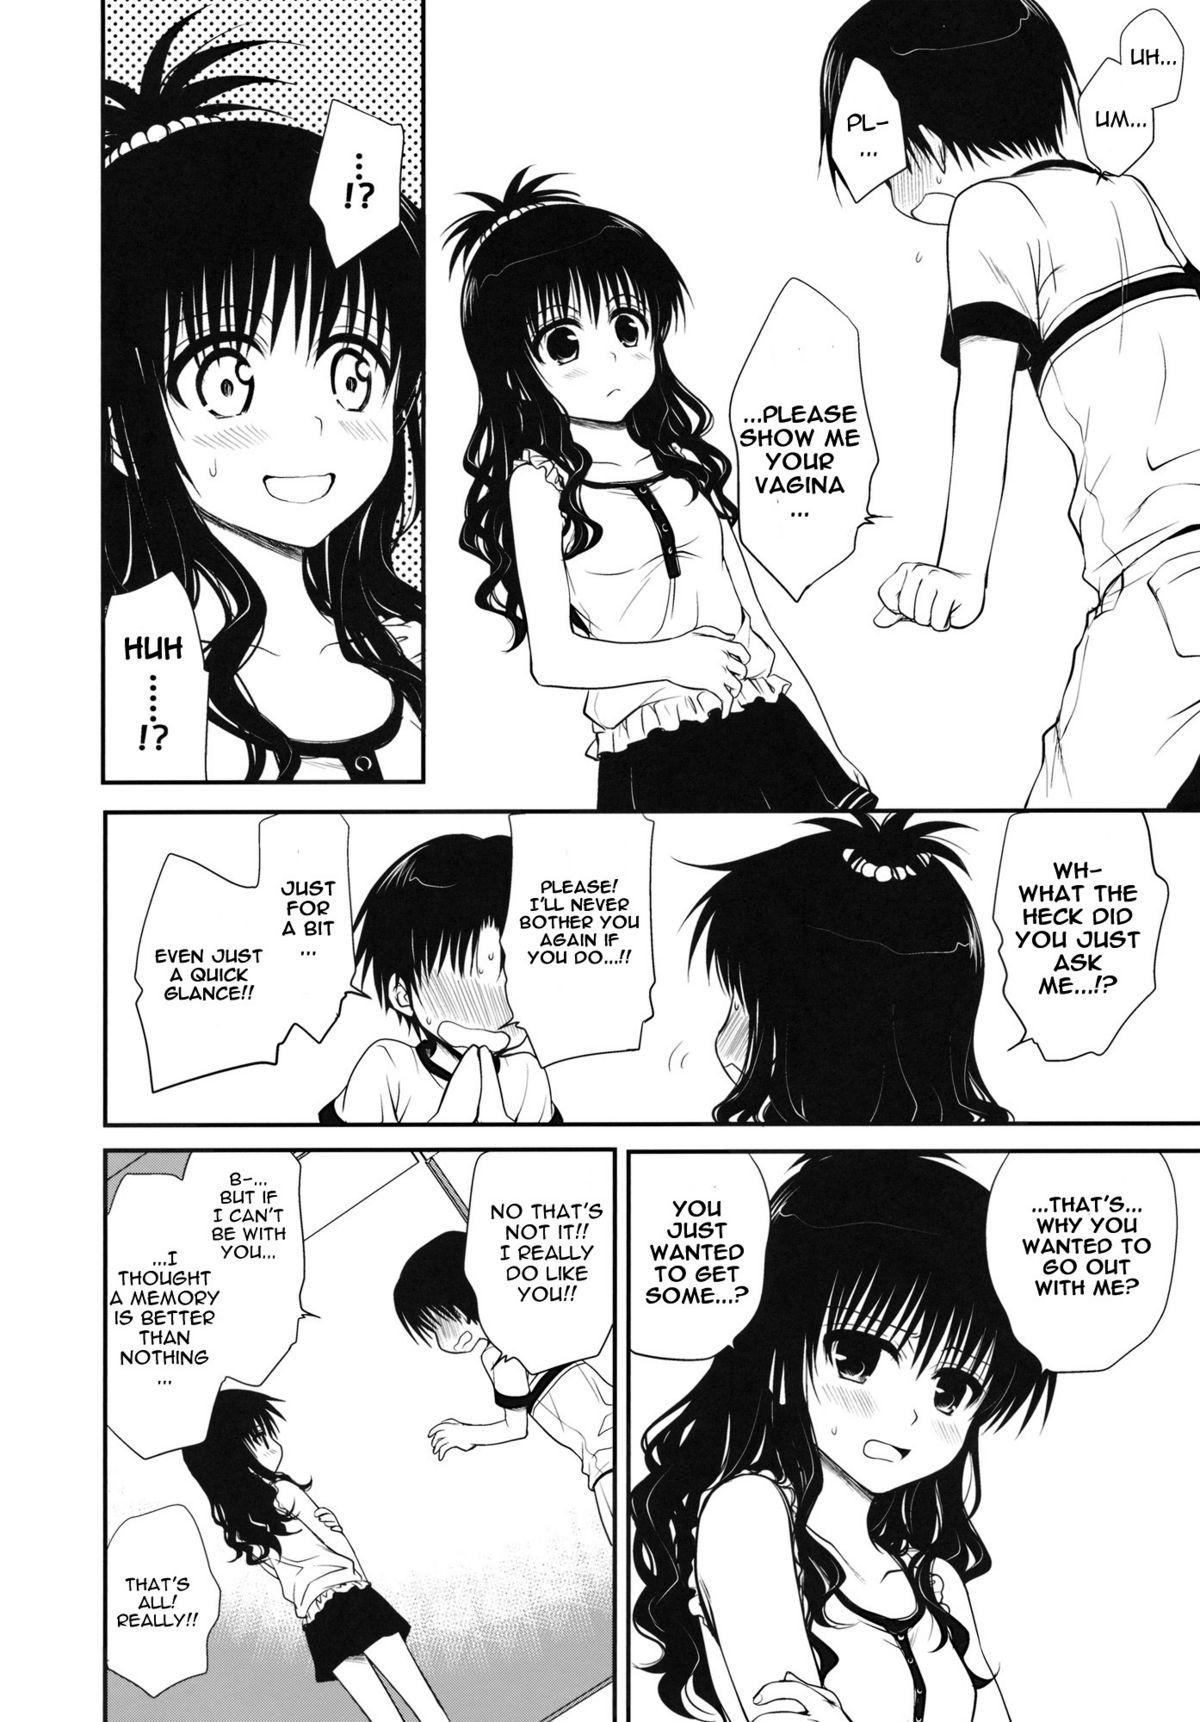 Argentina Houkago Mikan | After-School Mikan - To love-ru Lesbian Porn - Page 3